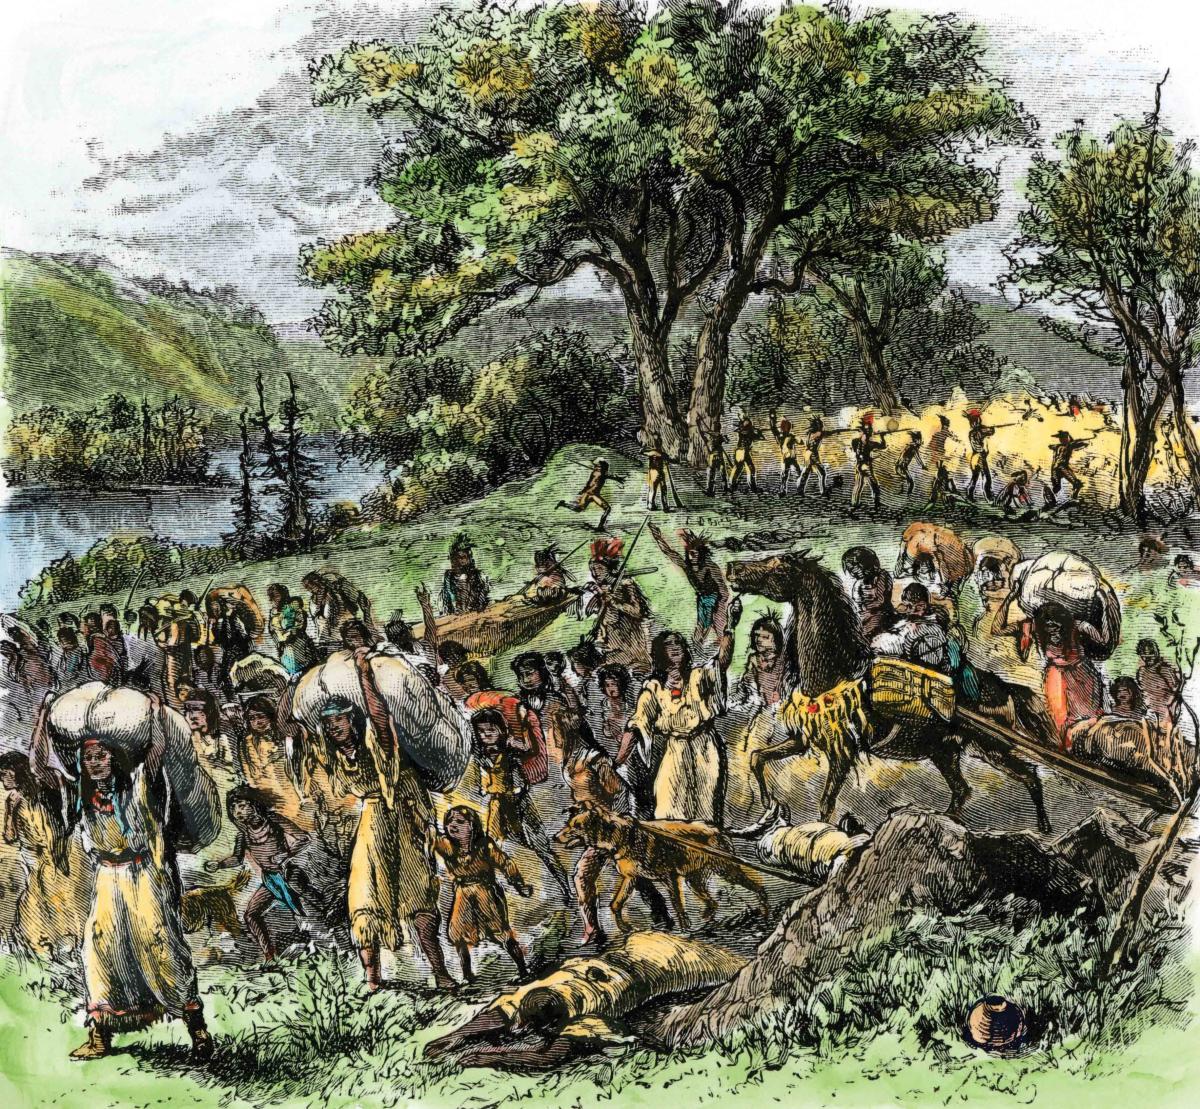 Painting of the Battle of Bad Axe depicting Native women and children fleeing fighting.